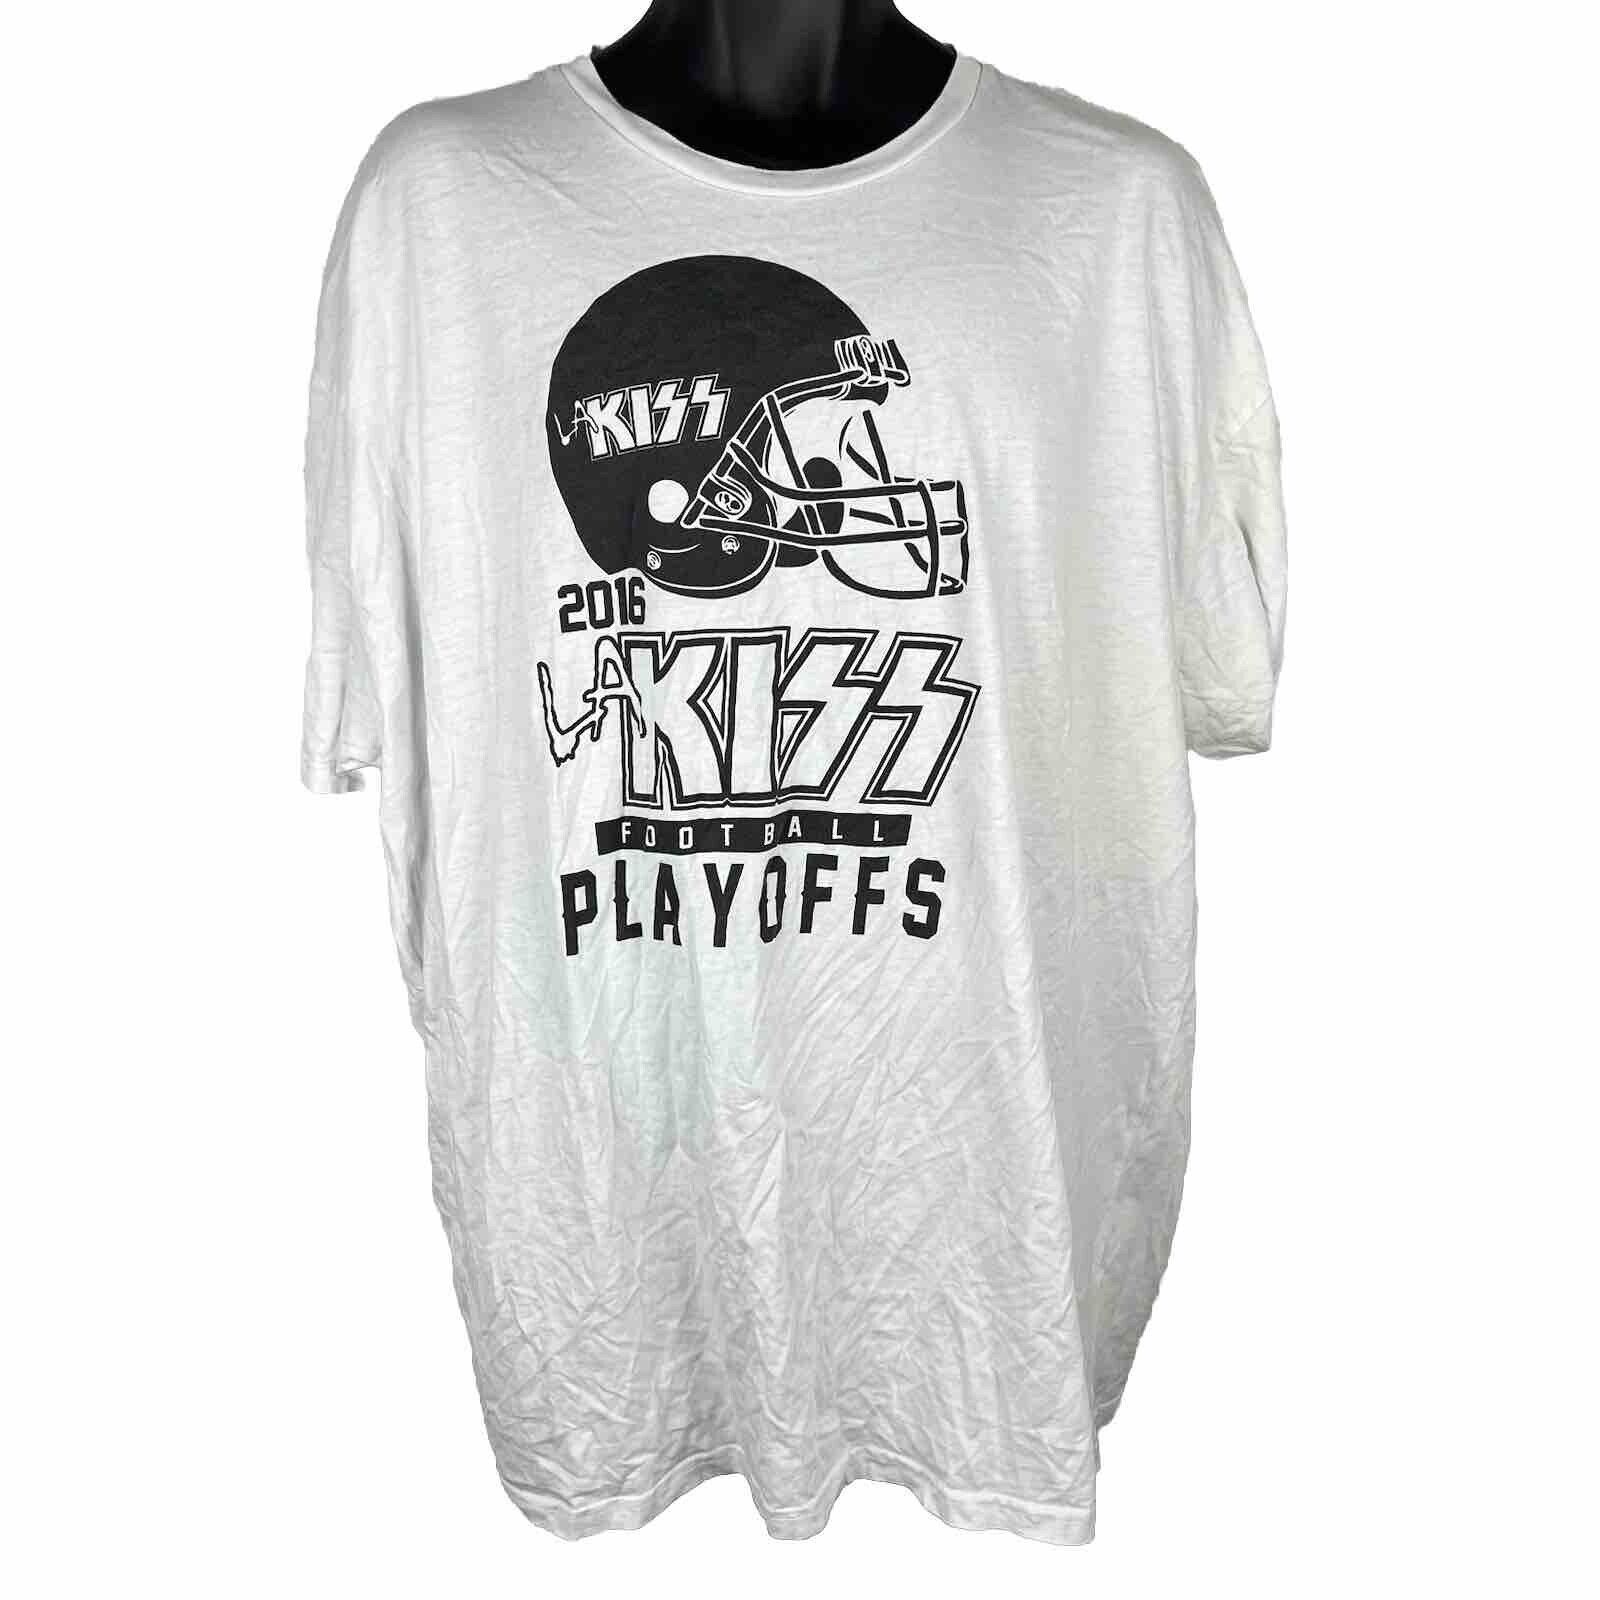 2016 L.A. Playoffs - Authentic Vintage Kiss Band Tee by Direct Tees 3XL USED